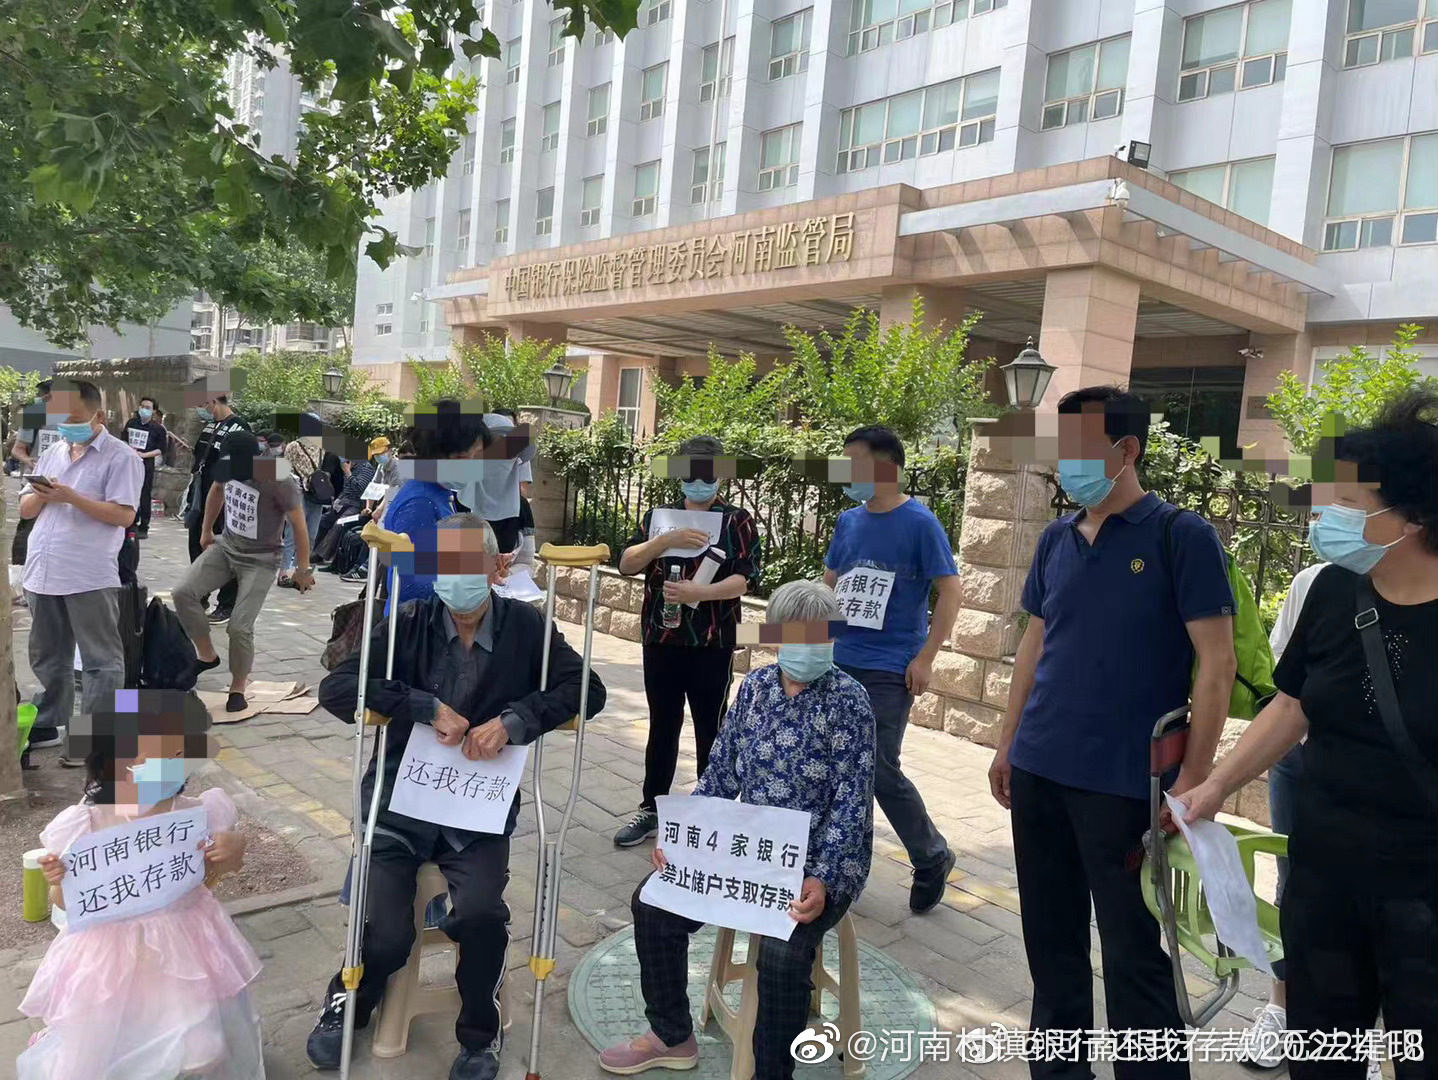 Depositors protest in front of the Henan branch of the China Banking and Insurance Regulatory Commission, demanding their money back after their funds were frozen. Photo: Weibo